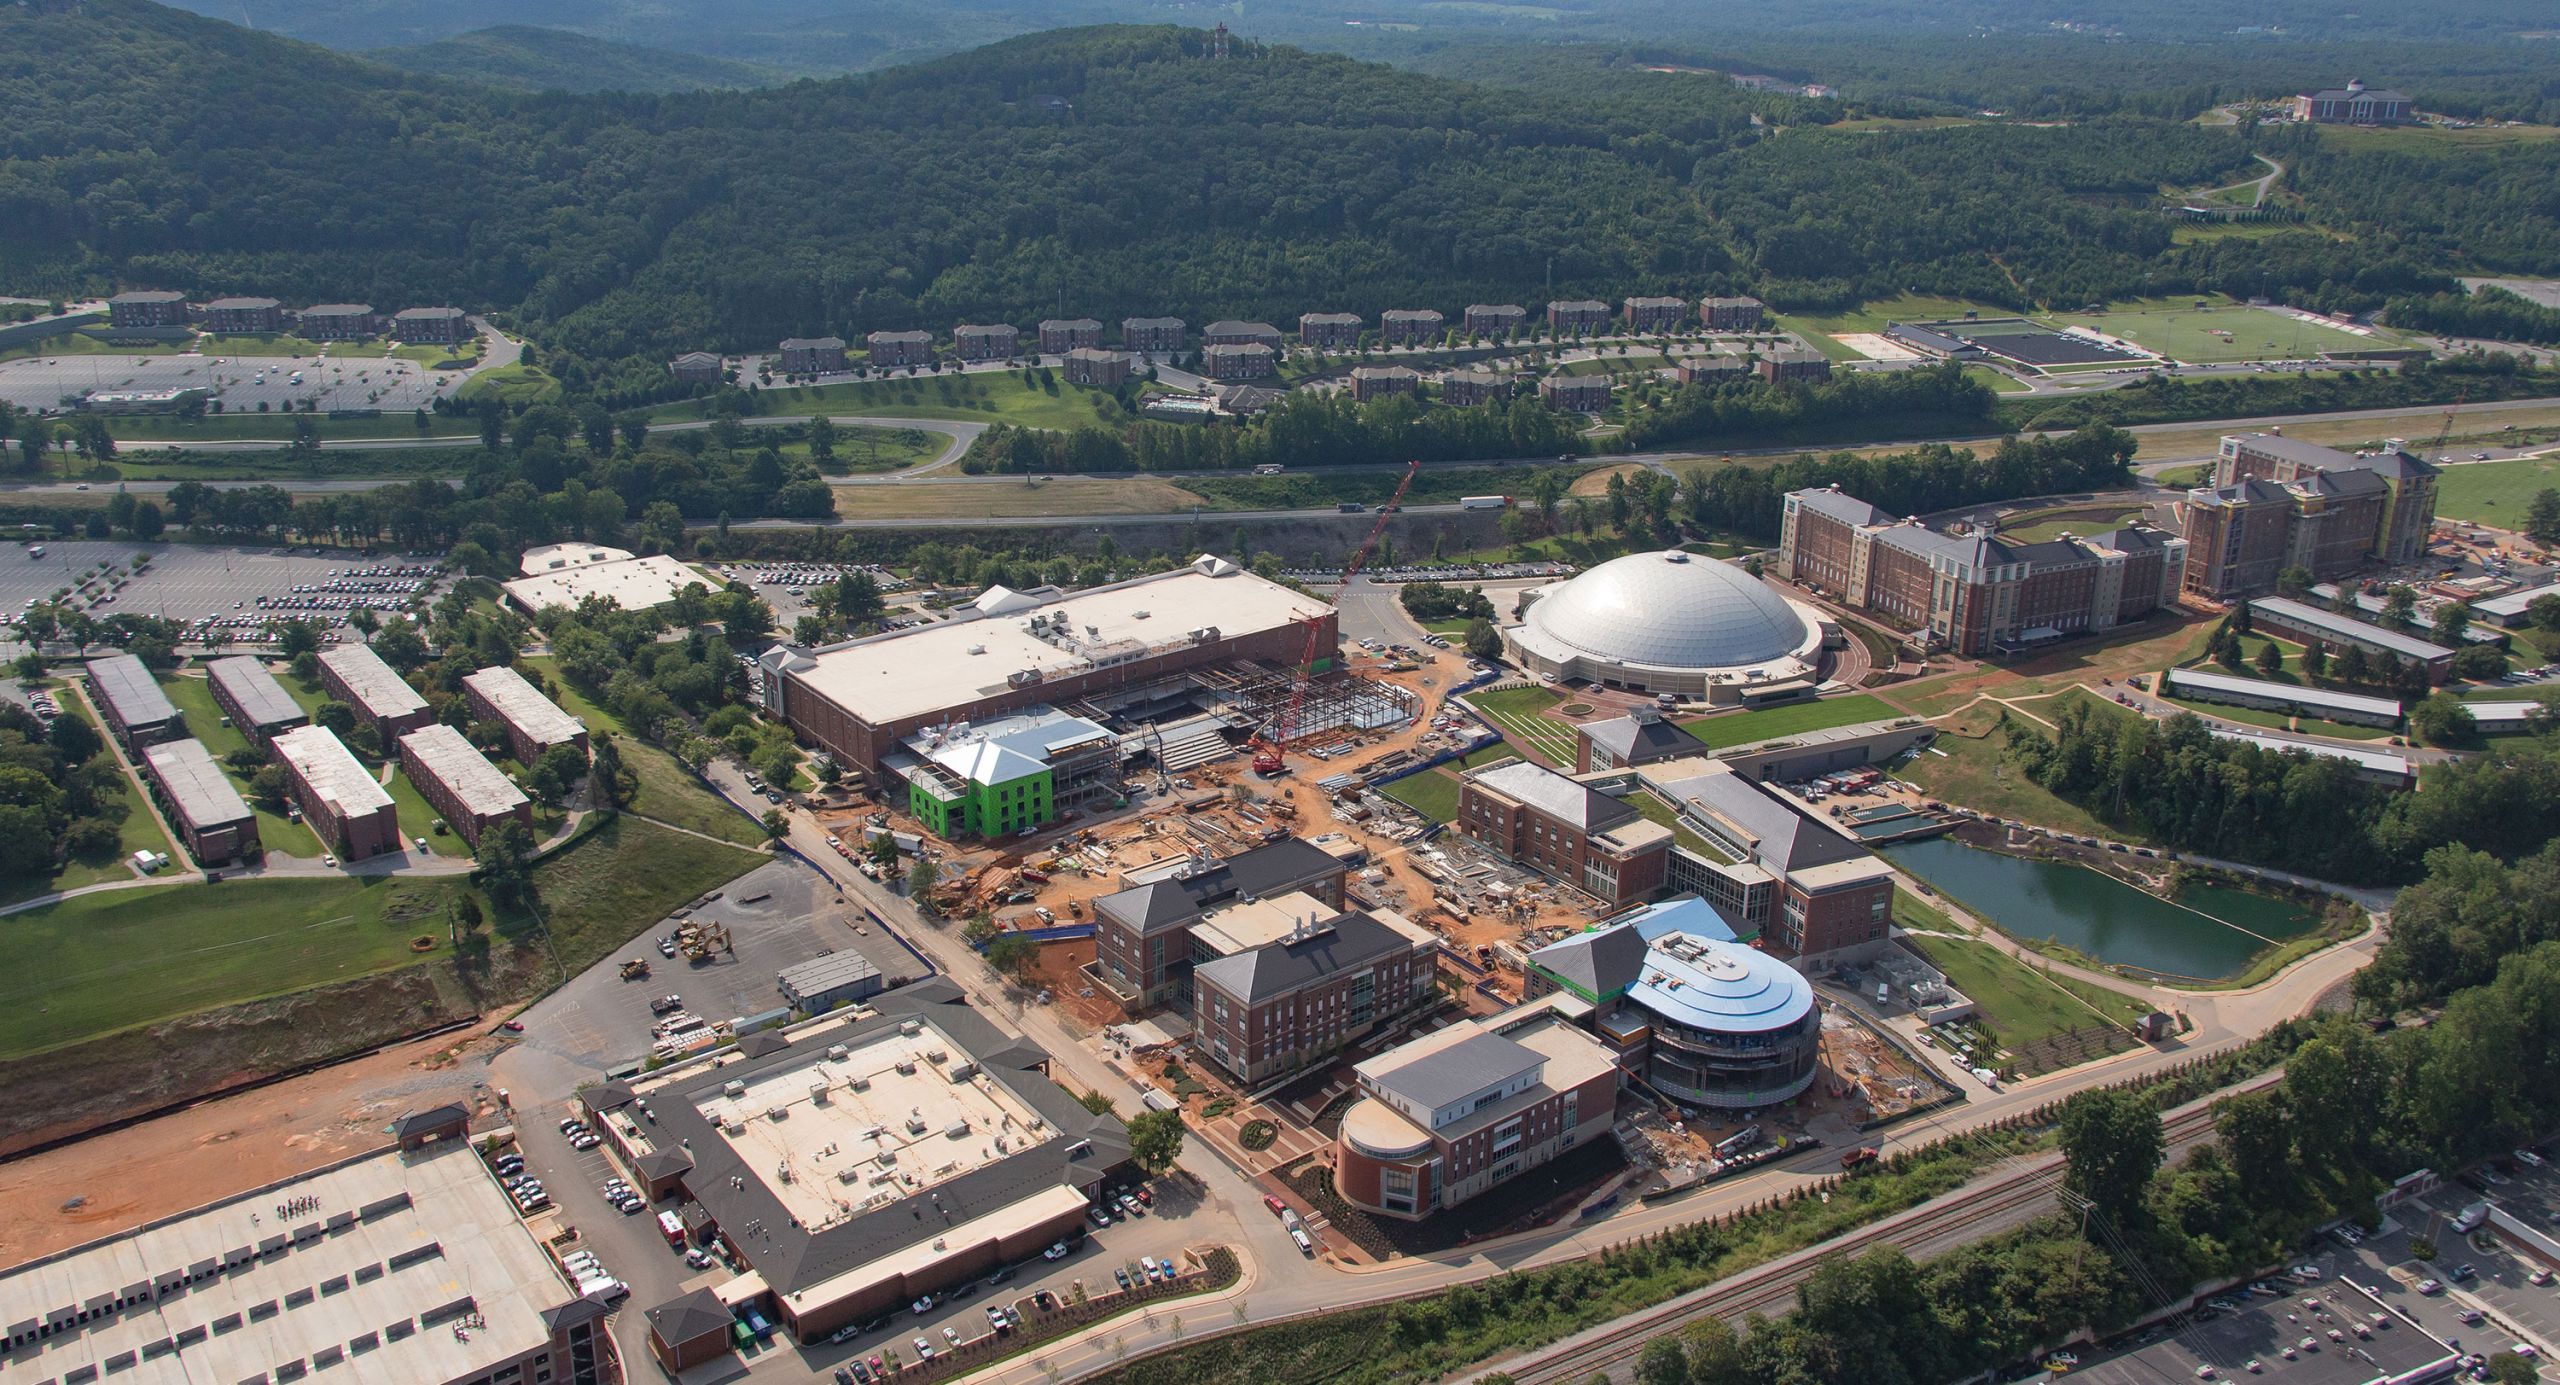 A $500 million rebuilding of campus has changed Liberty’s landscape dramatically.